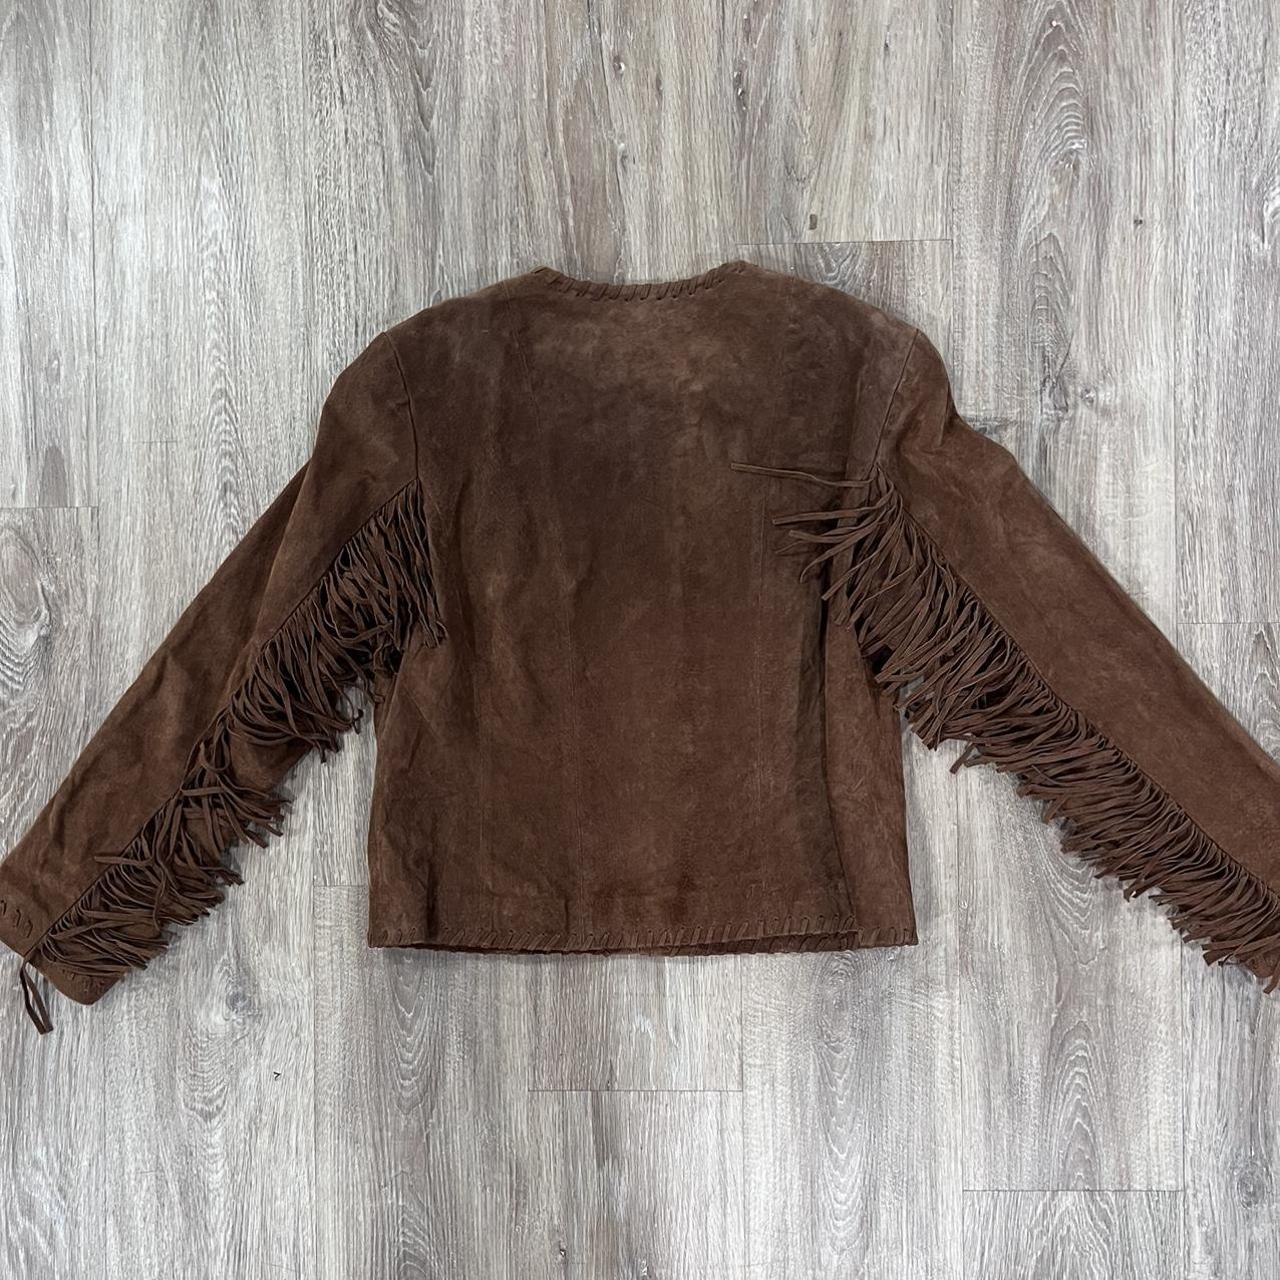 The most yummy choco brown suede/faux leather... - Depop